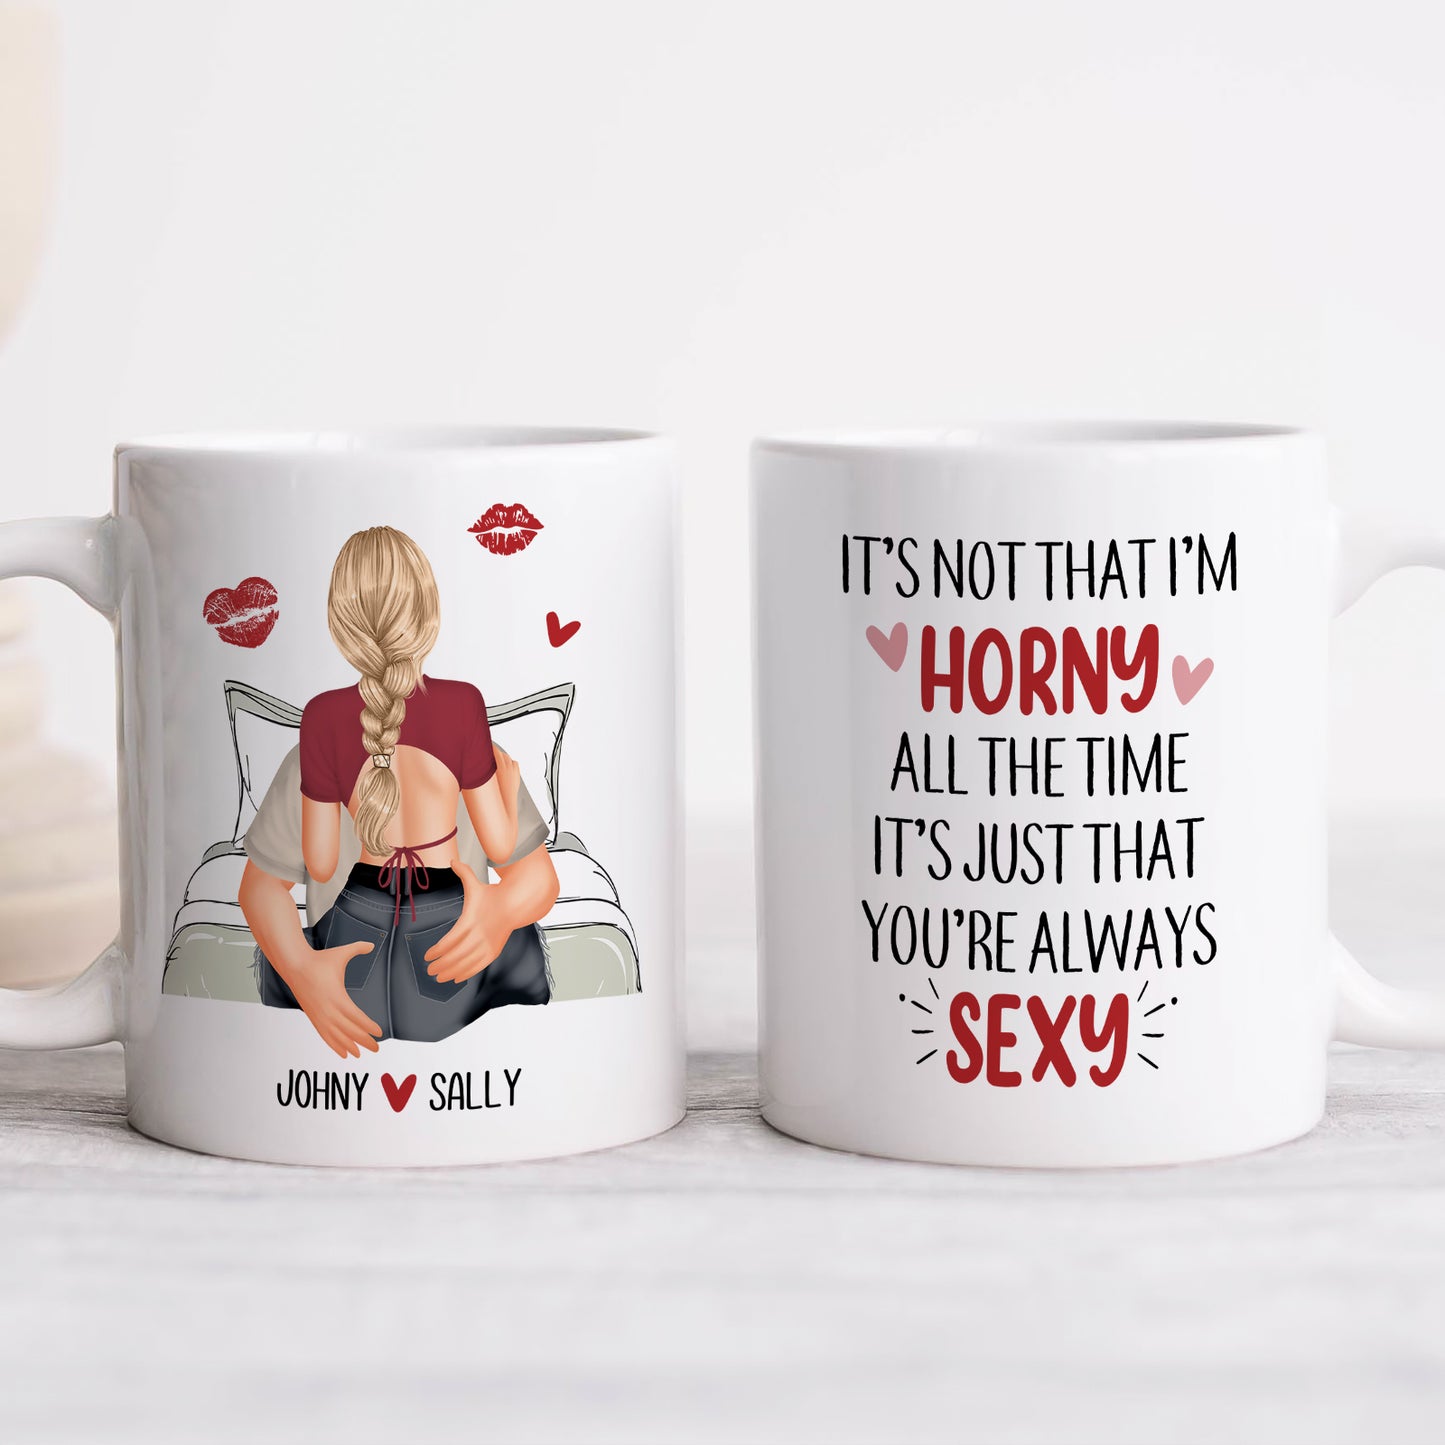 Couple - Personalized Mug - Valentine's Day Gifts For Her, Wife, Girlfriend